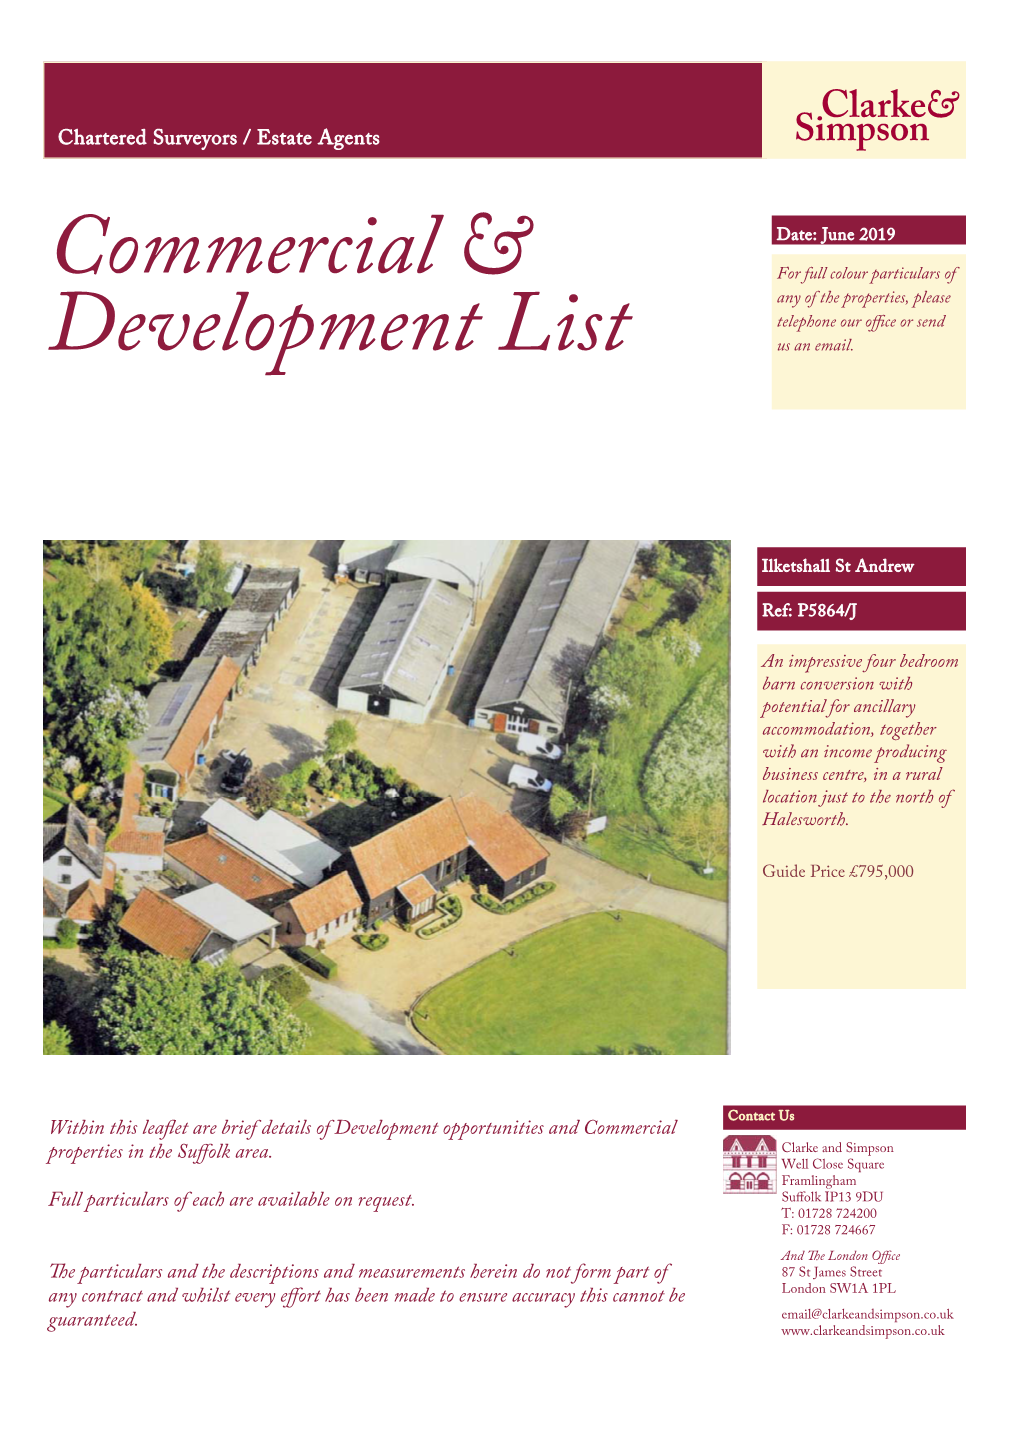 Commercial List